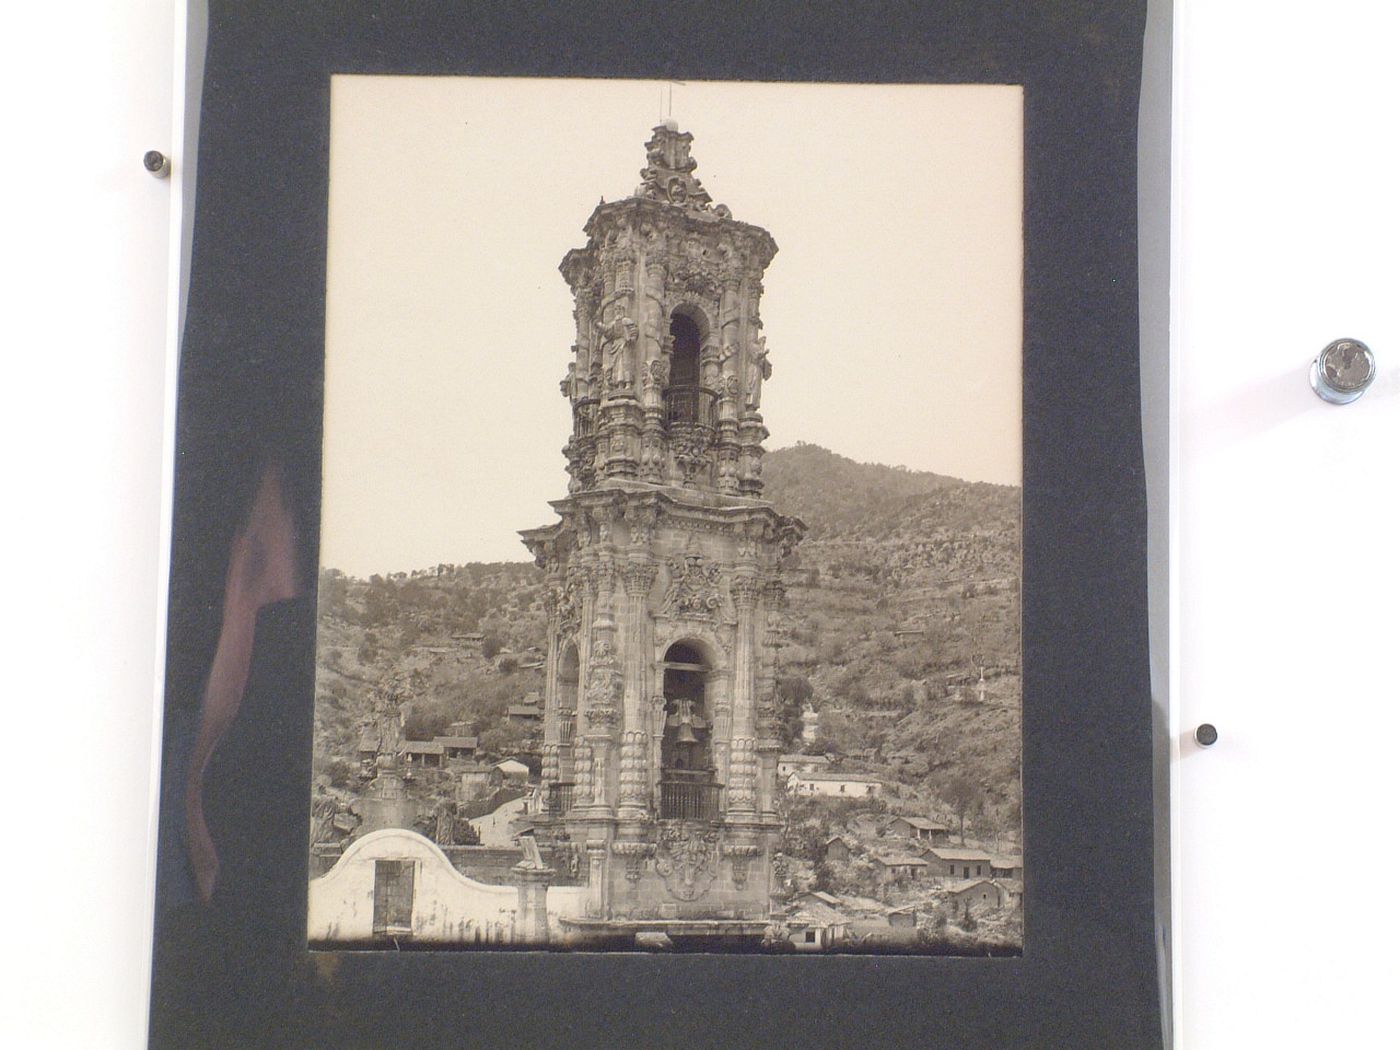 View of the northern tower of the Church of Santa Prisca with buildings and hills in the background, Taxco de Alarcón, Mexico